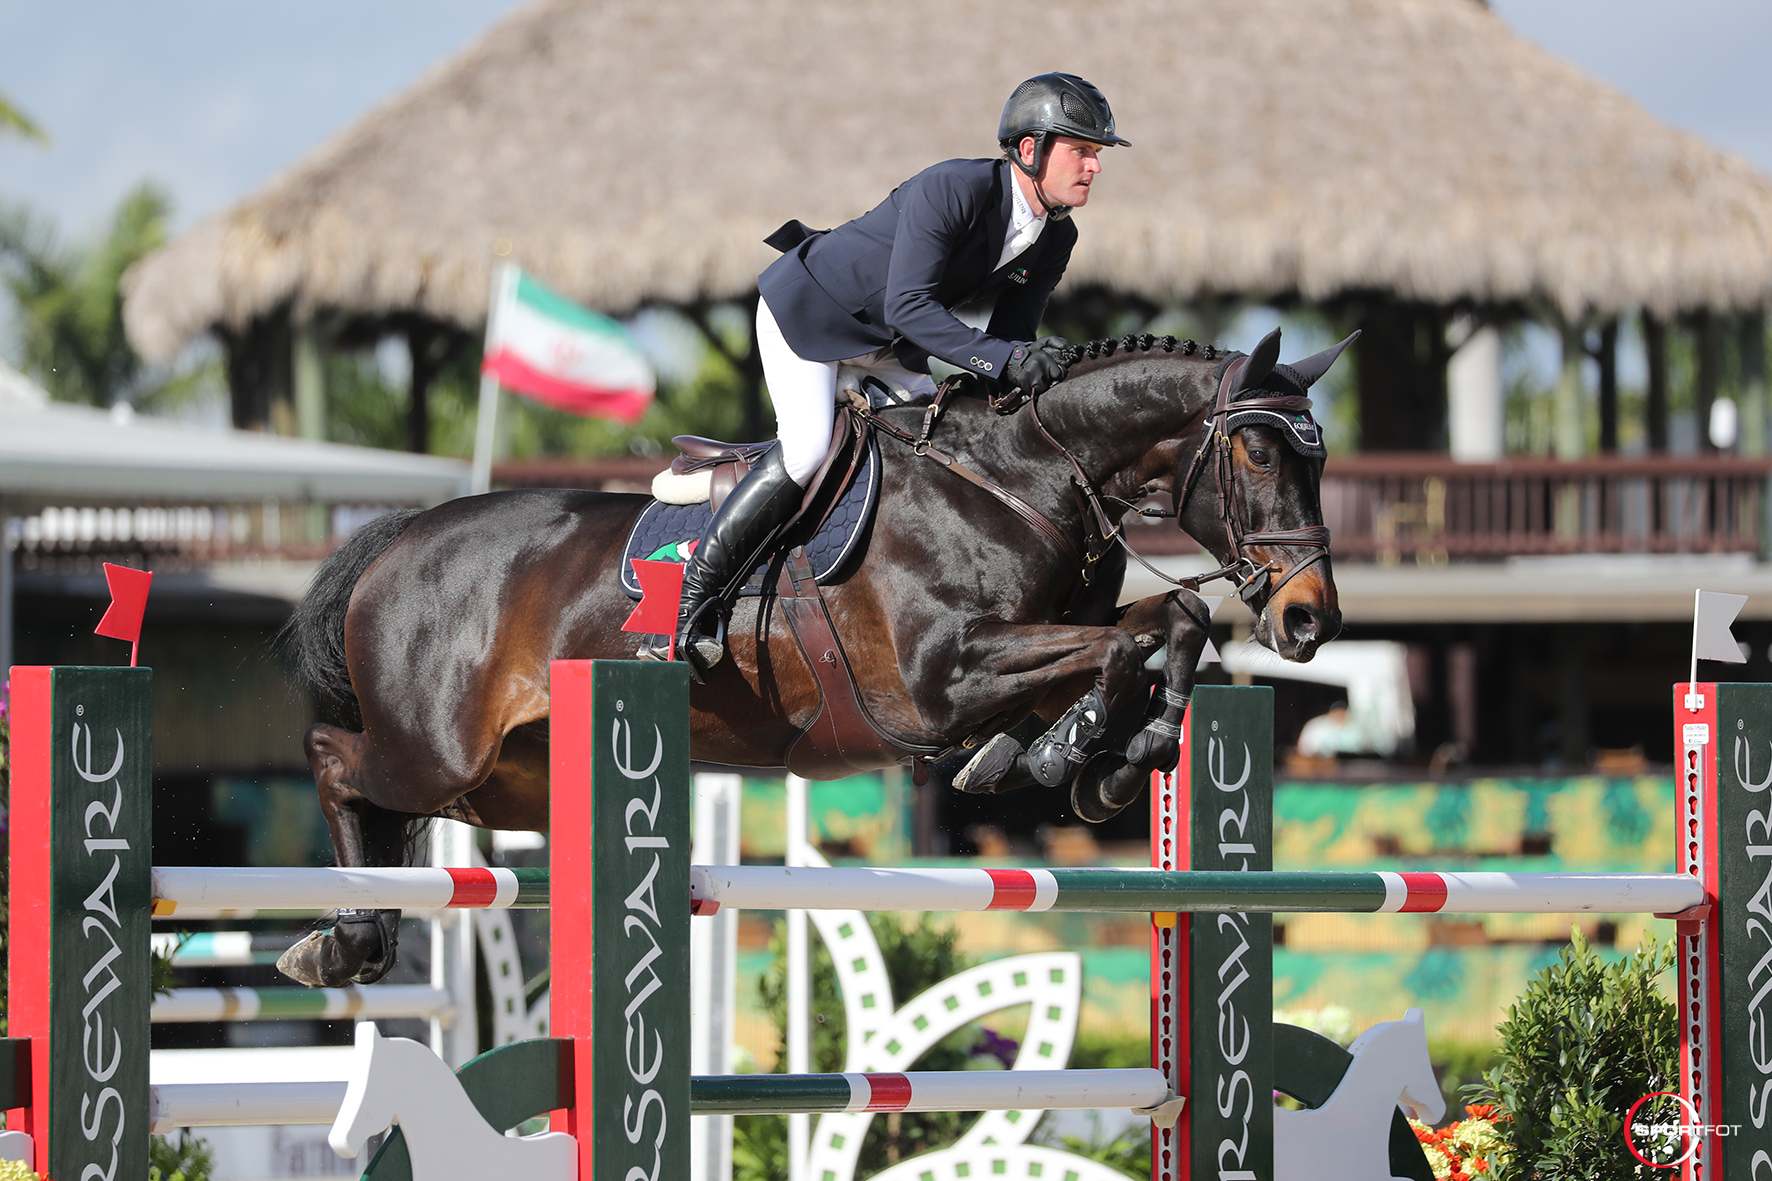 Kenny and Maher Take Top Titles in the $6,000 Bainbridge Companies 1.40m Jumpers